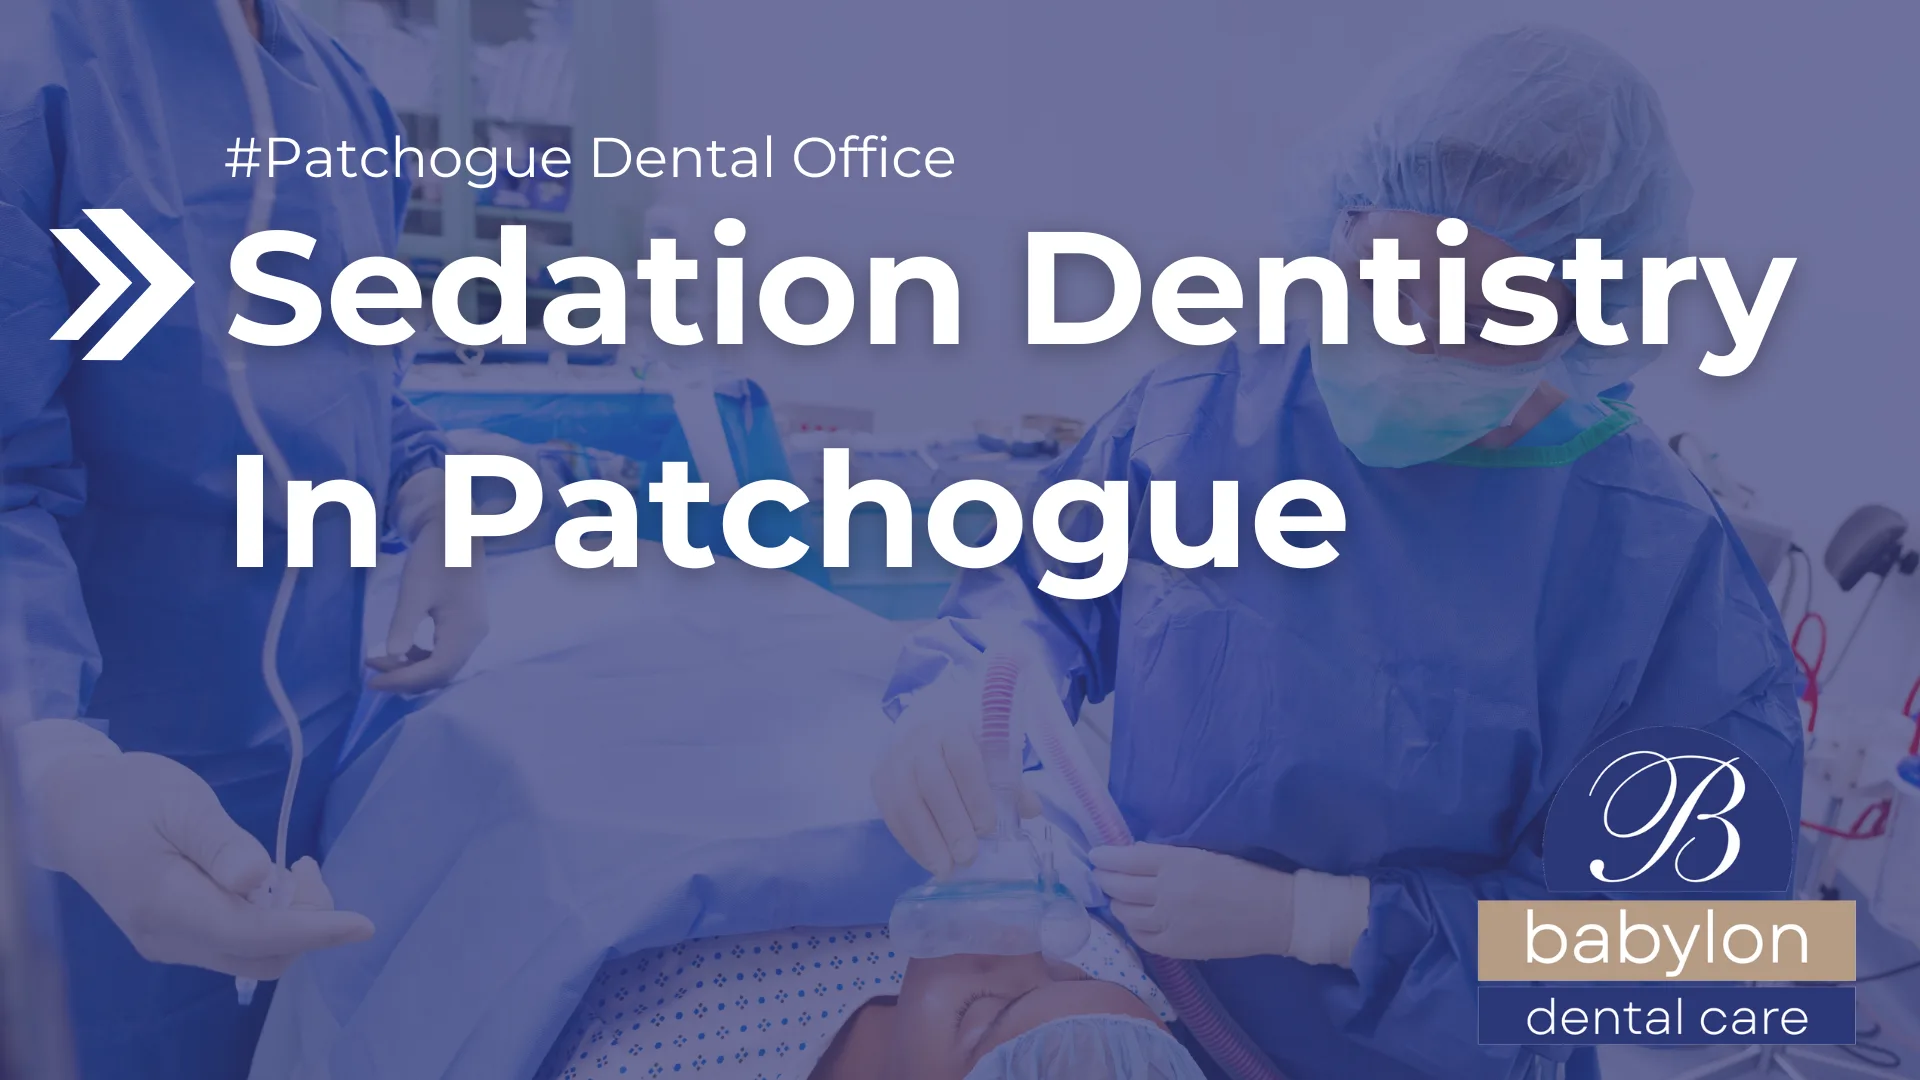 Sedation Dentistry In Patchogue Image - new logo